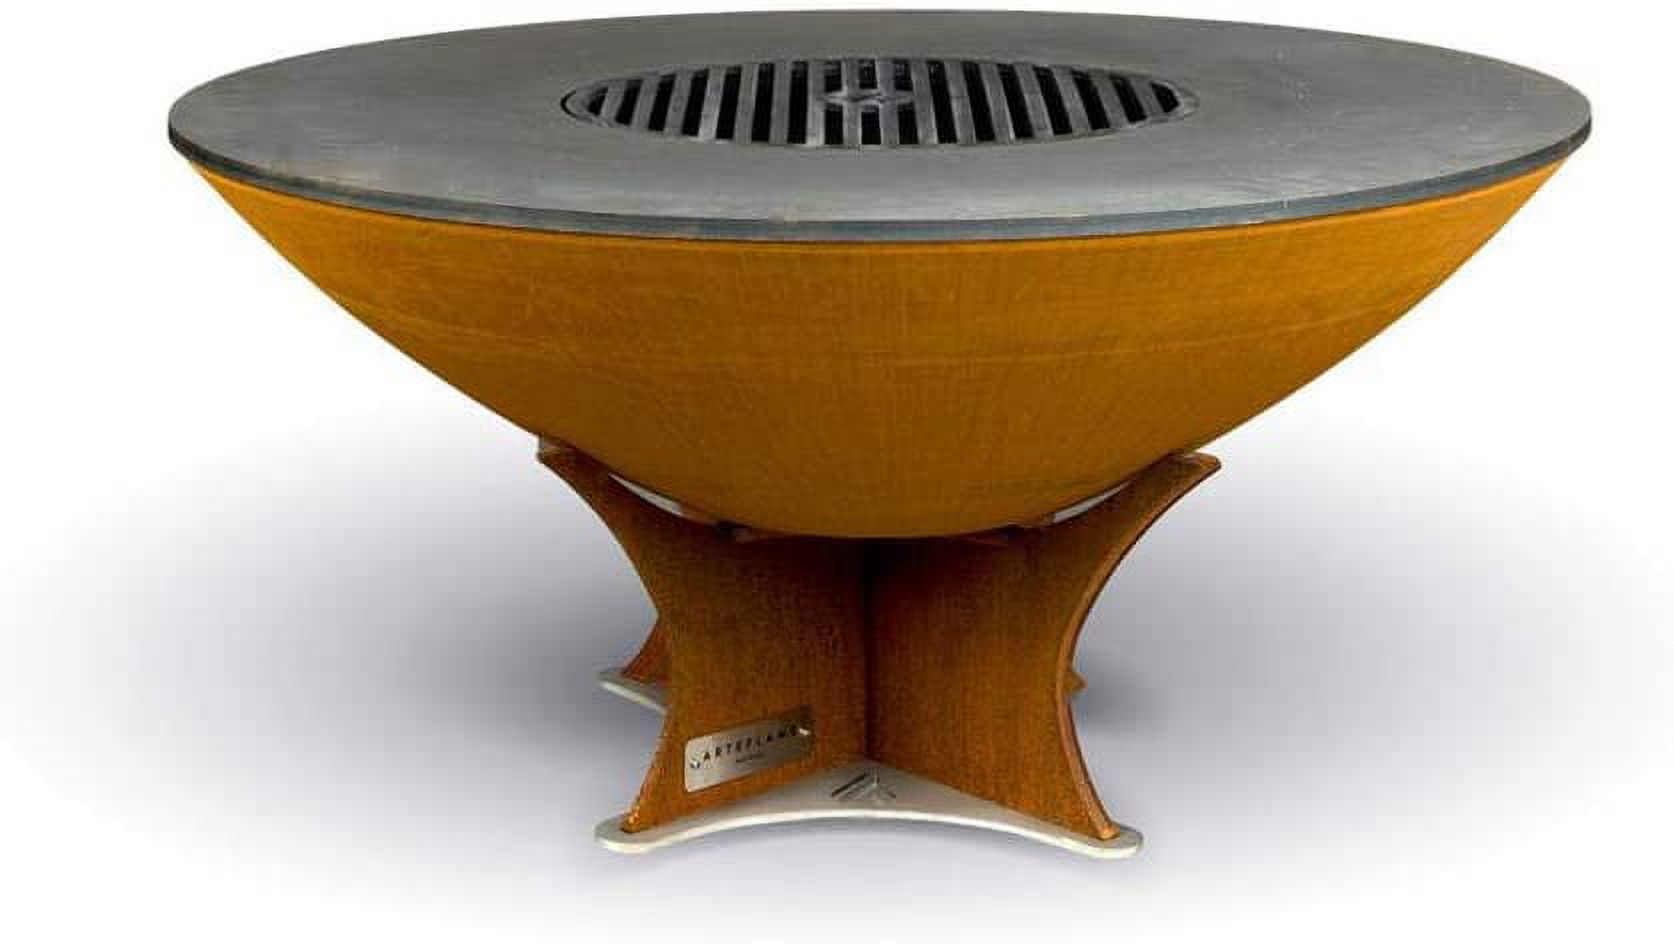 Arteflame Classic 40" Grill with a Low Euro Base - image 1 of 10